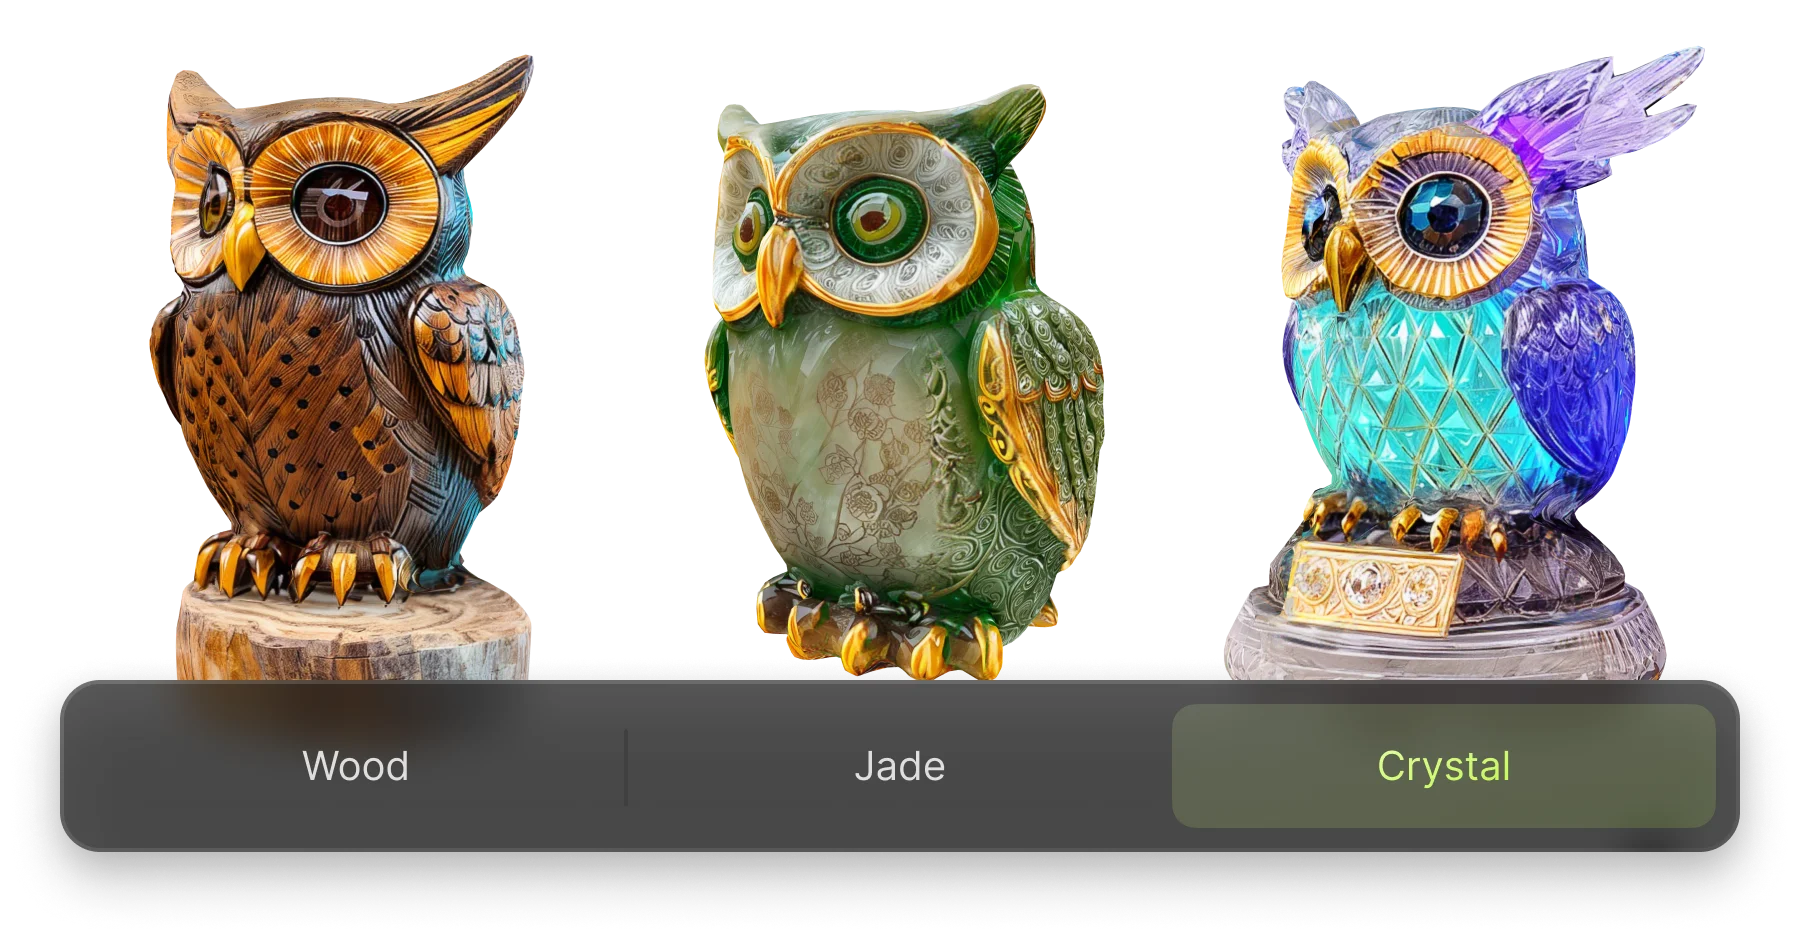 Base prompt: a small owl statue with a bow on its head